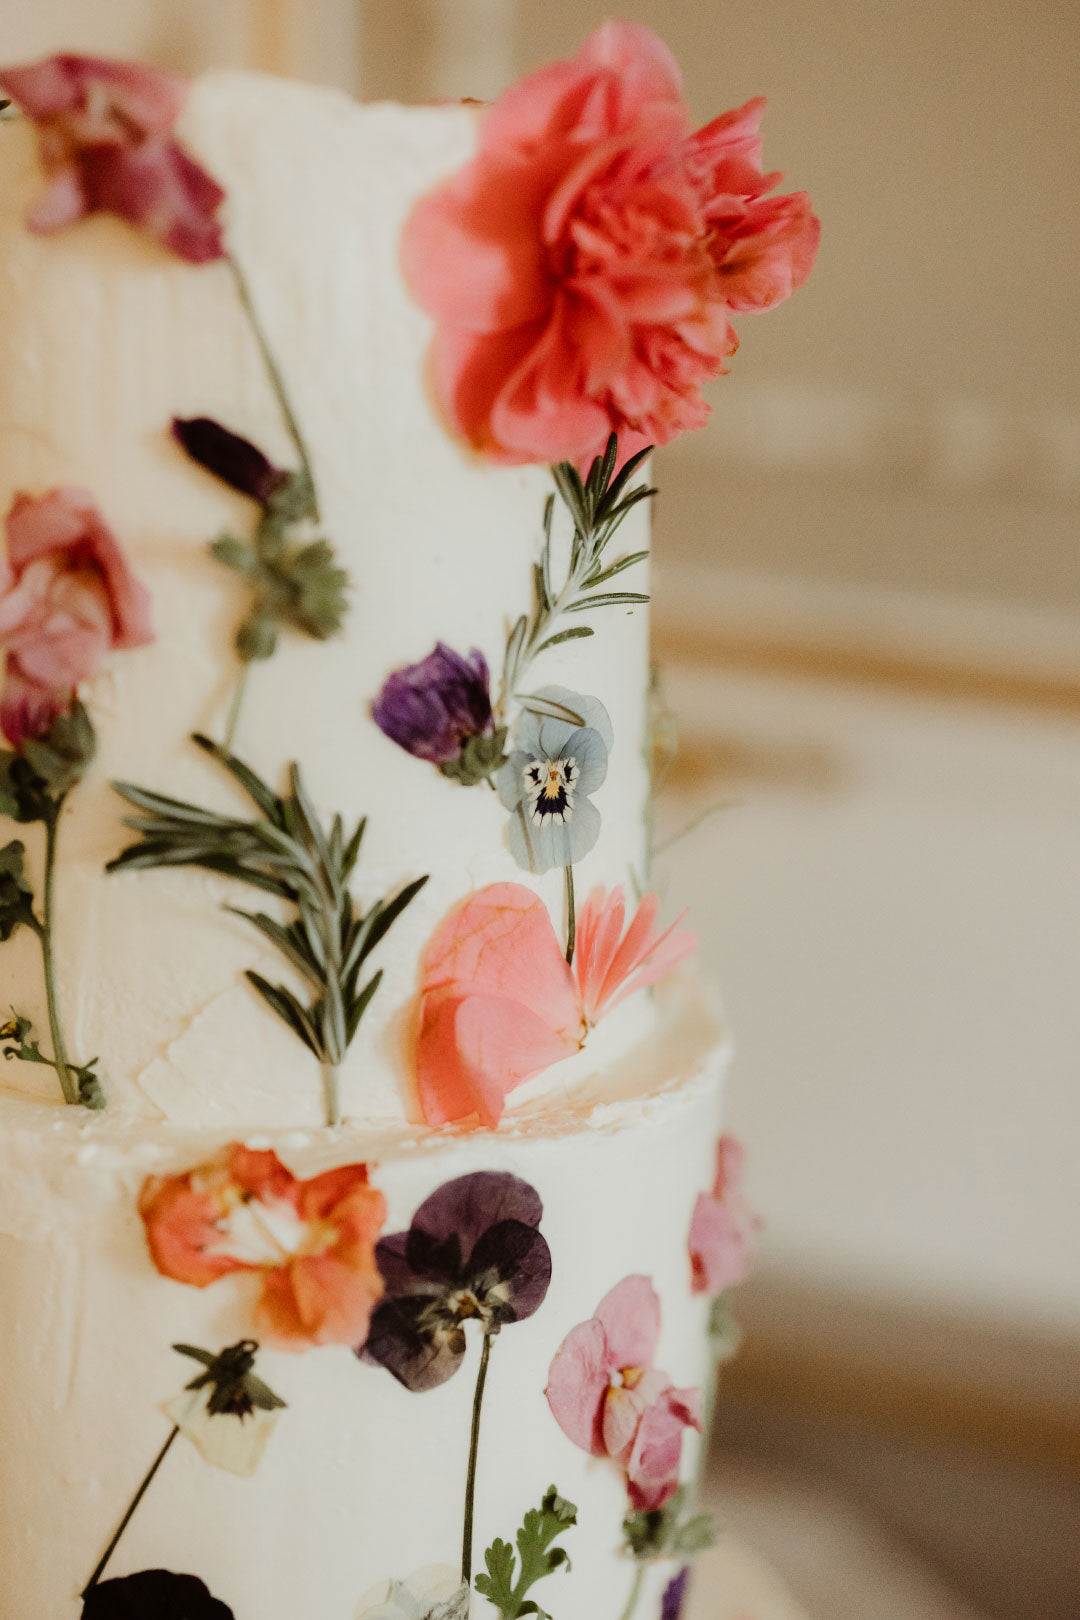 Wedding Cake with decorated with edible flowers